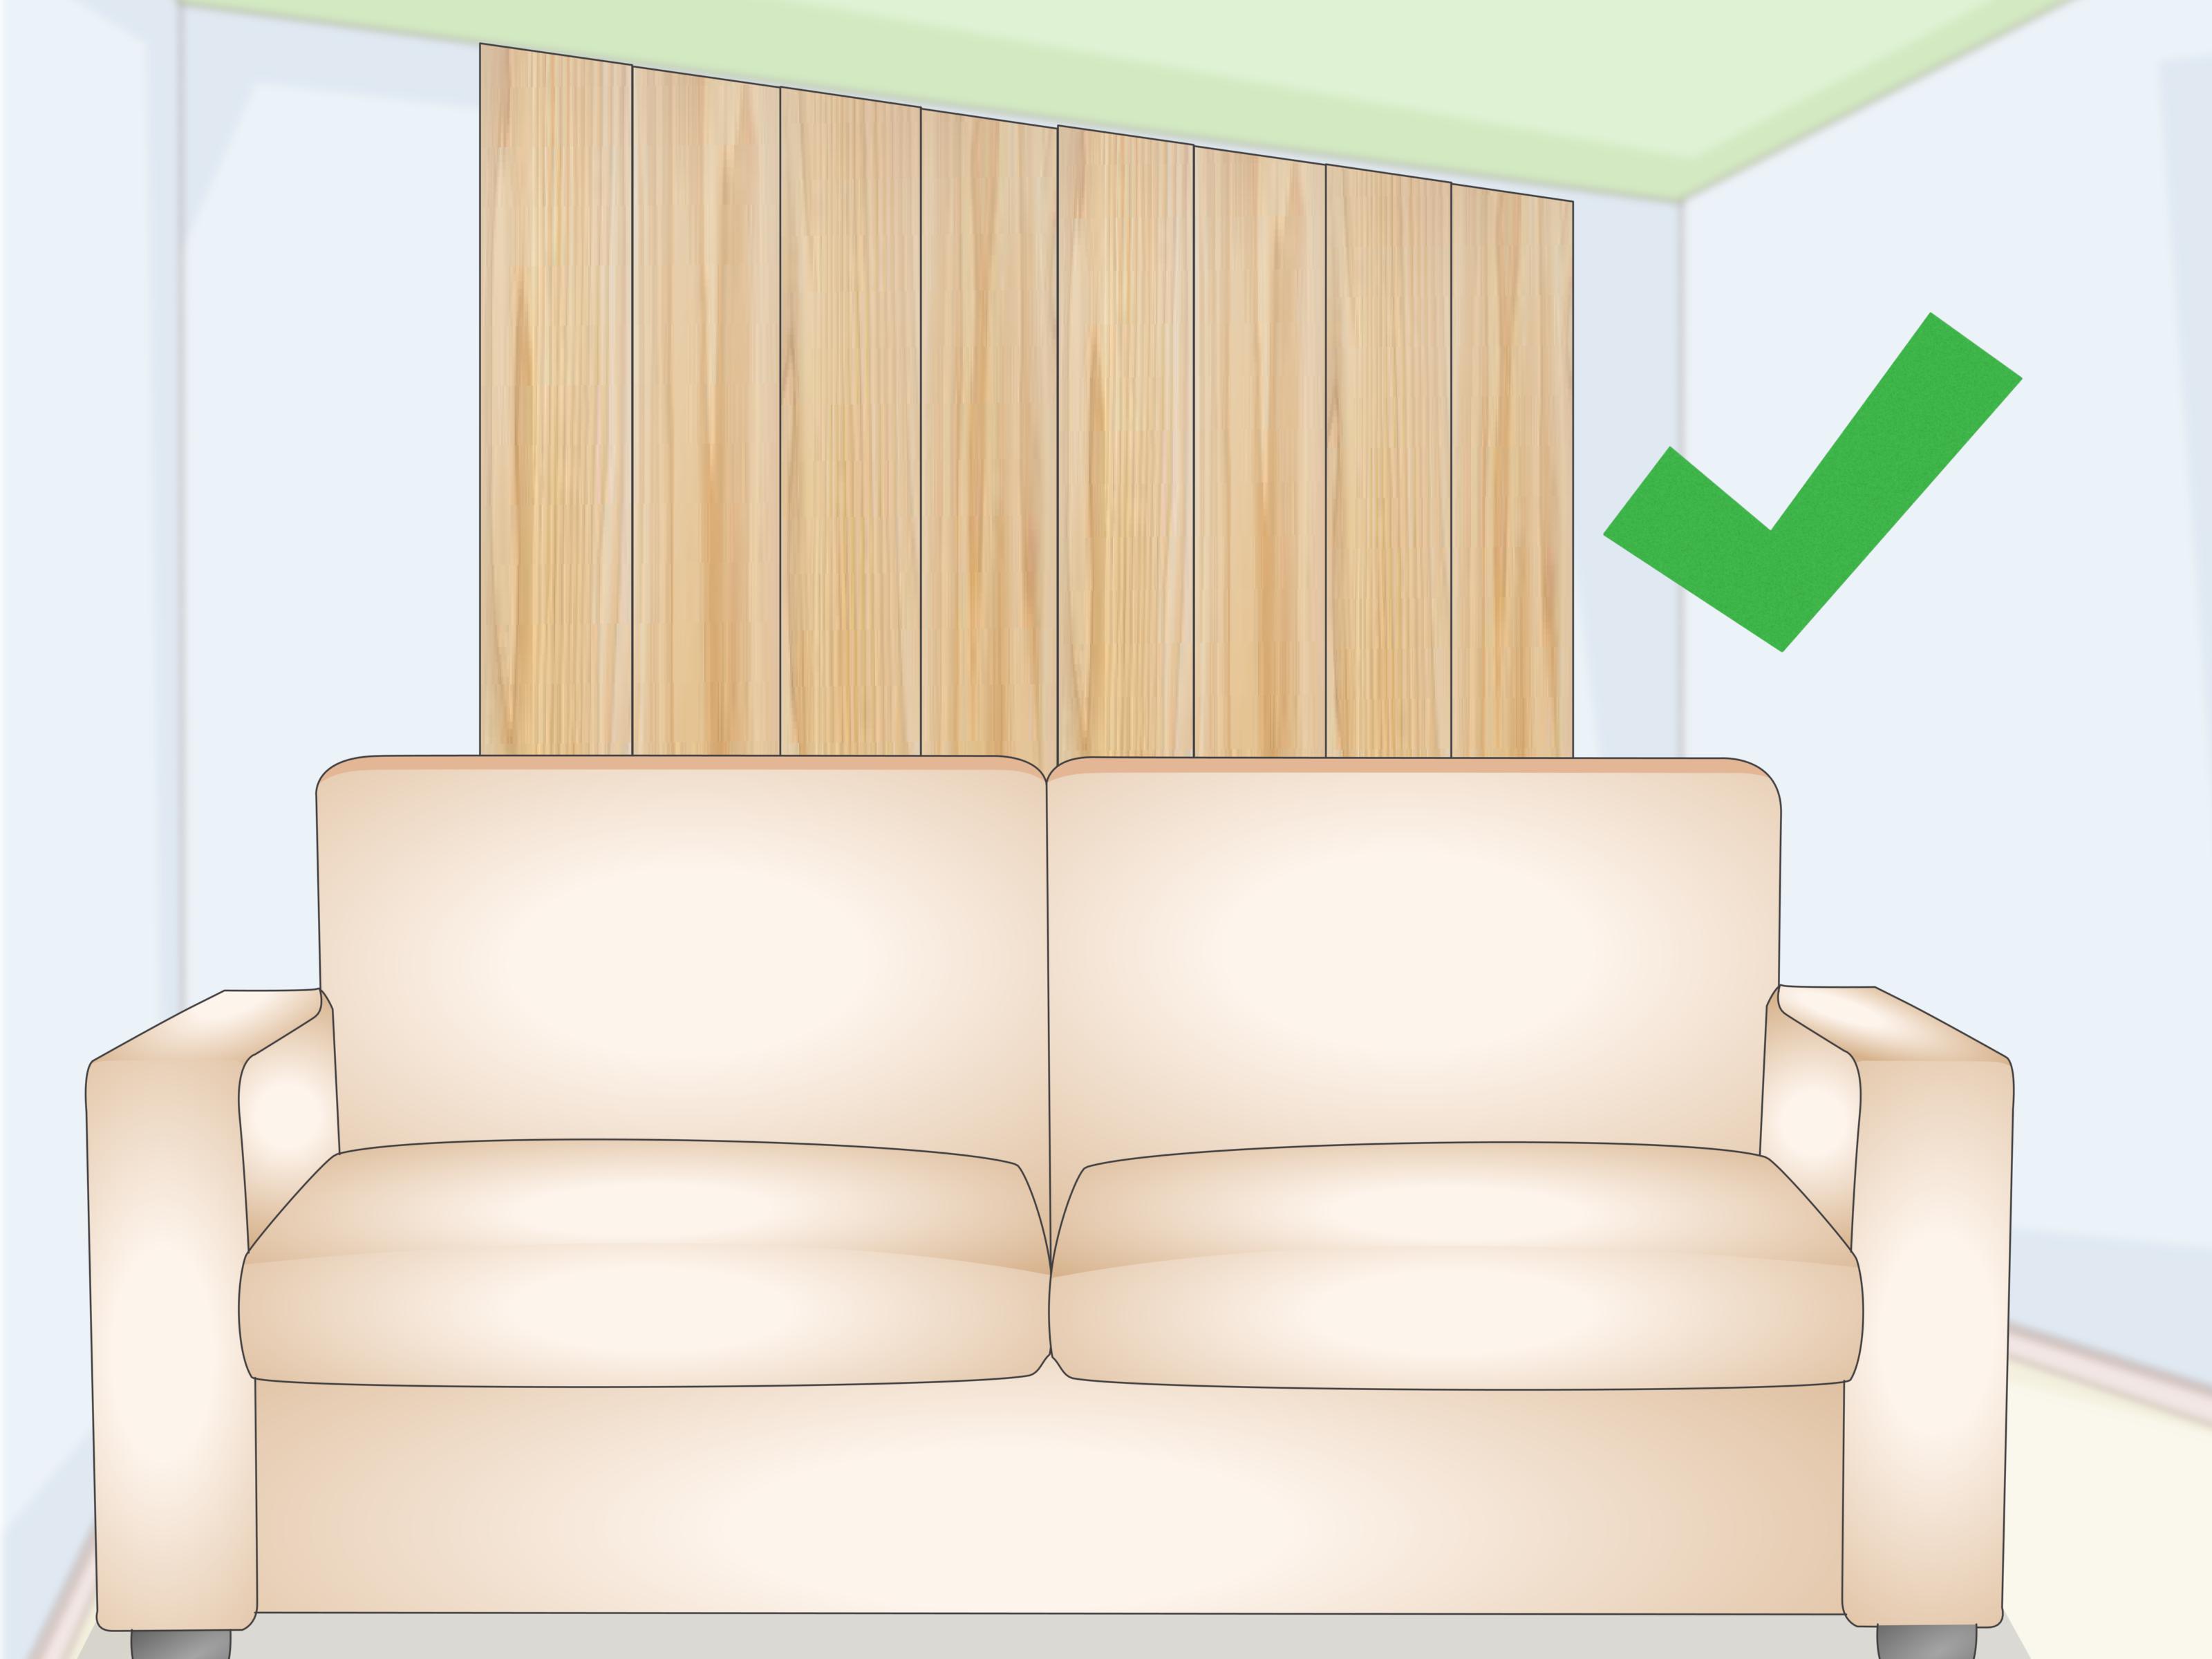 Image Titled Decorate The Wall Behind A Couch Step - Studio Couch - HD Wallpaper 